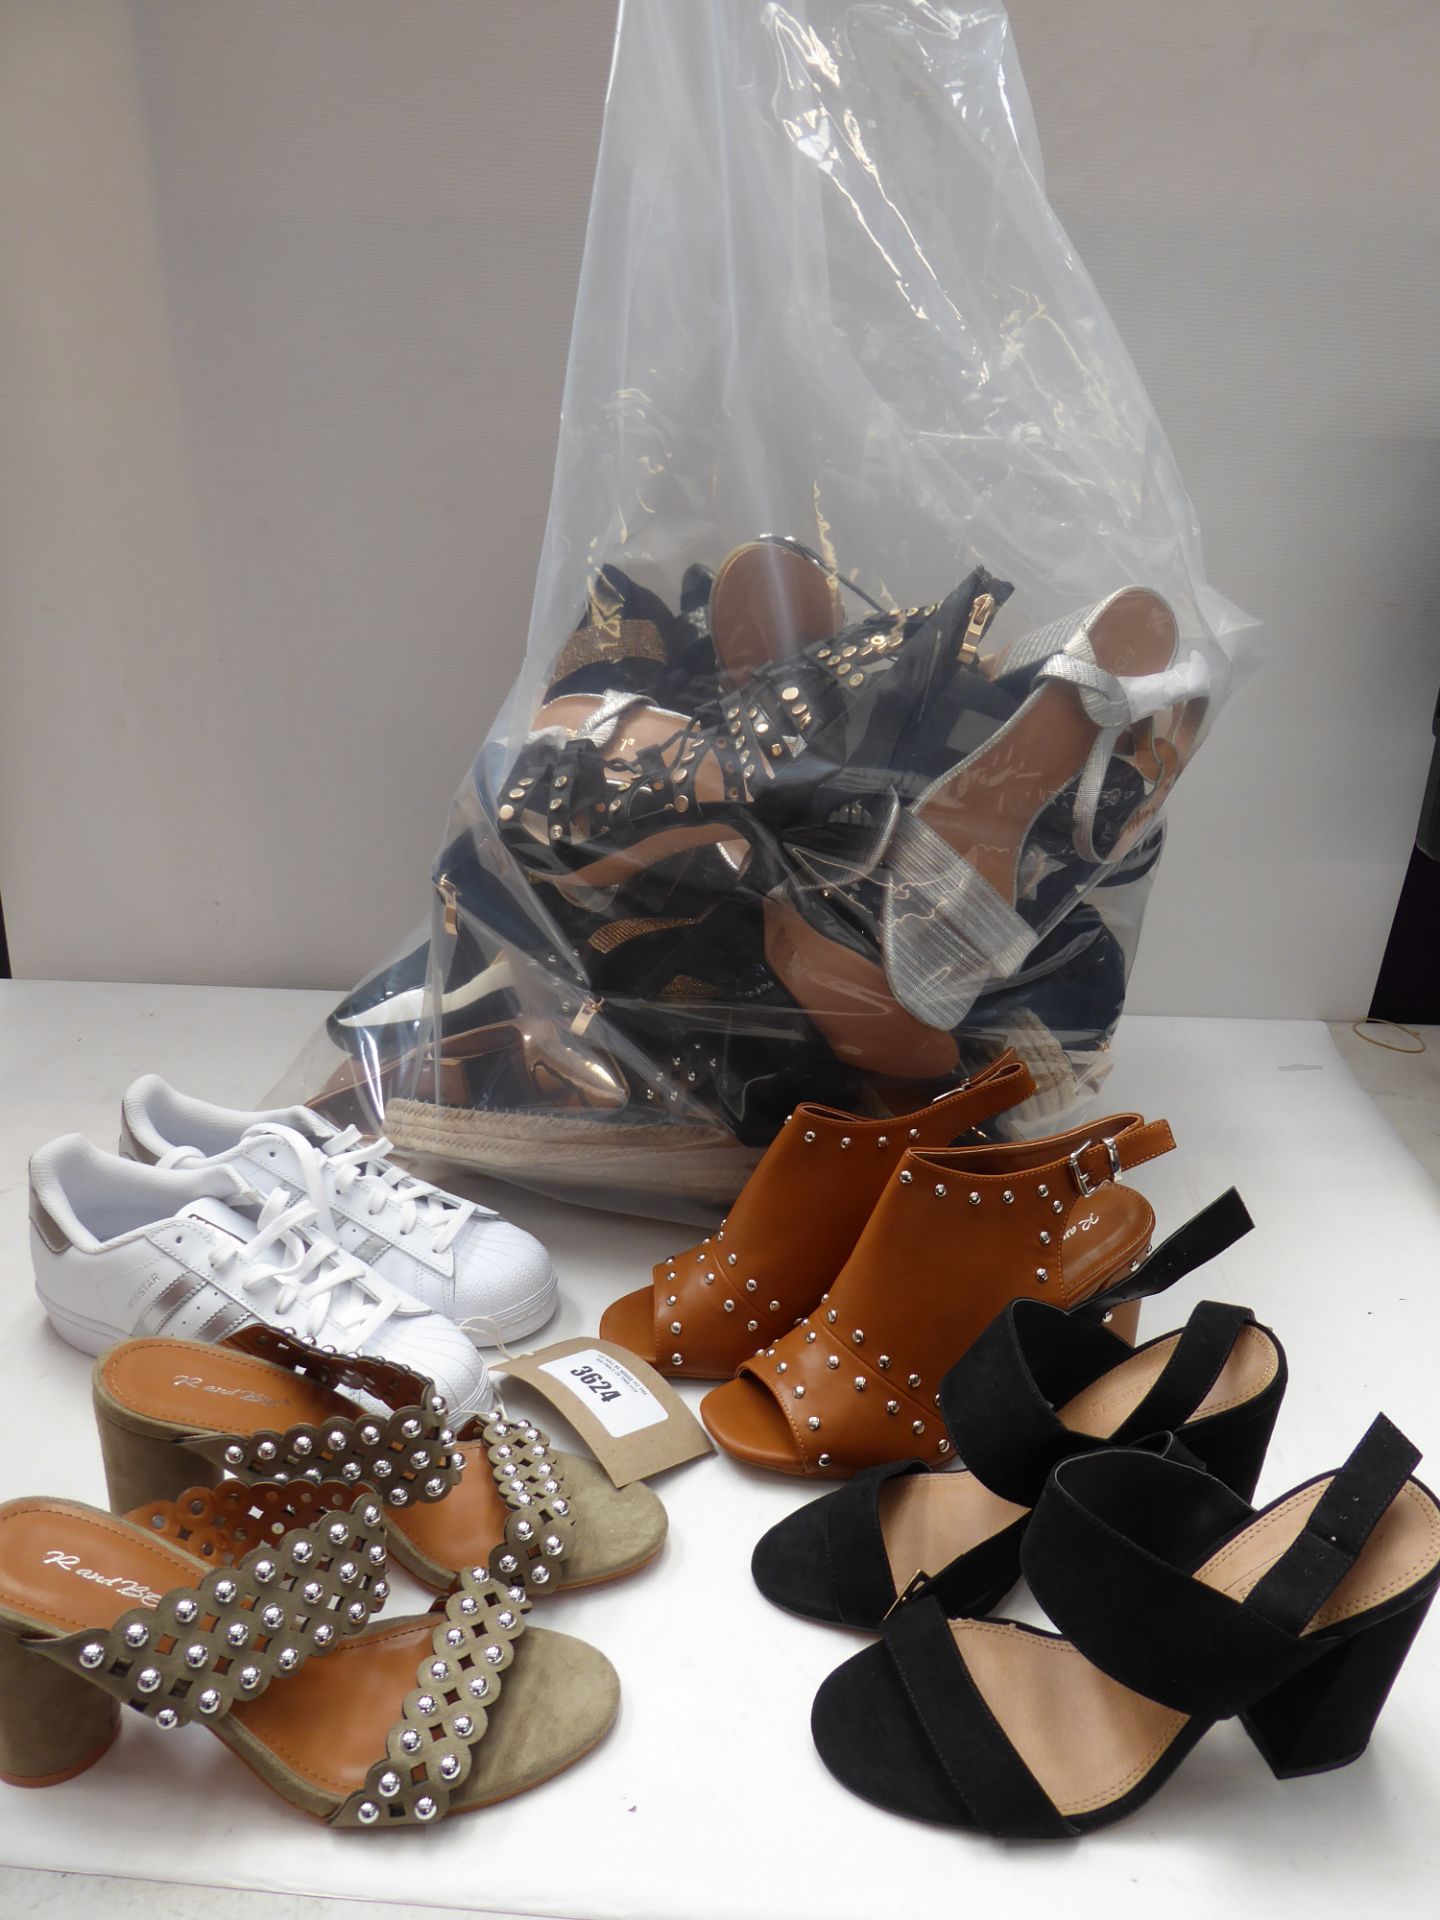 Large Bag Containing Lady's Shoes and Boots in Various Sizes